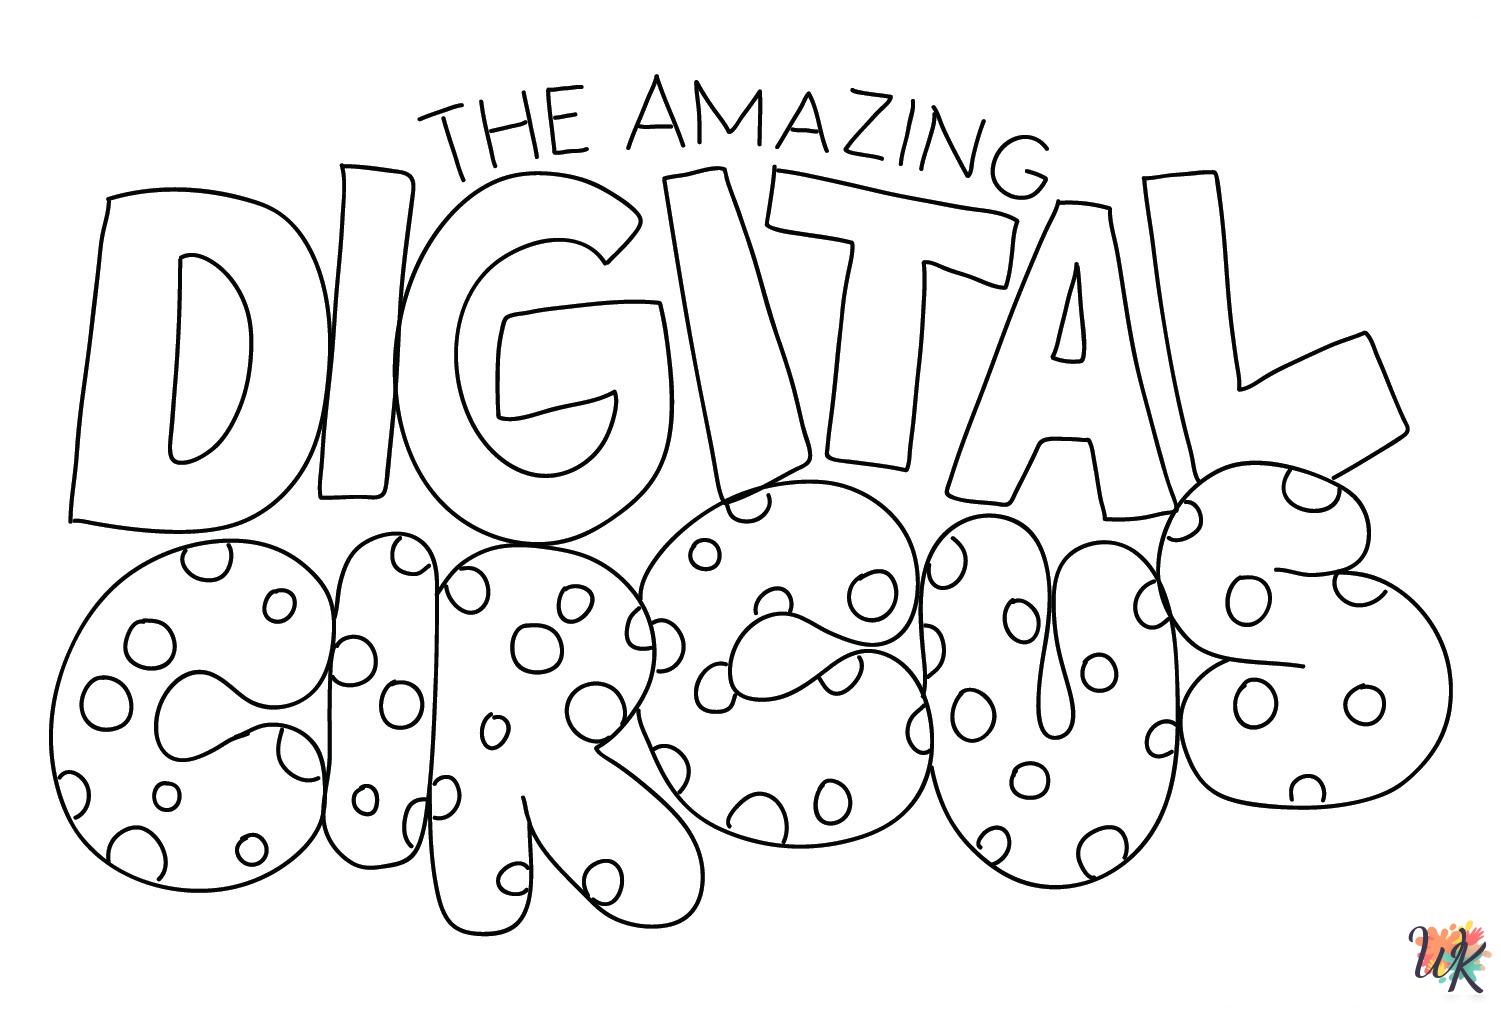 The Amazing Digital Circus free coloring pages